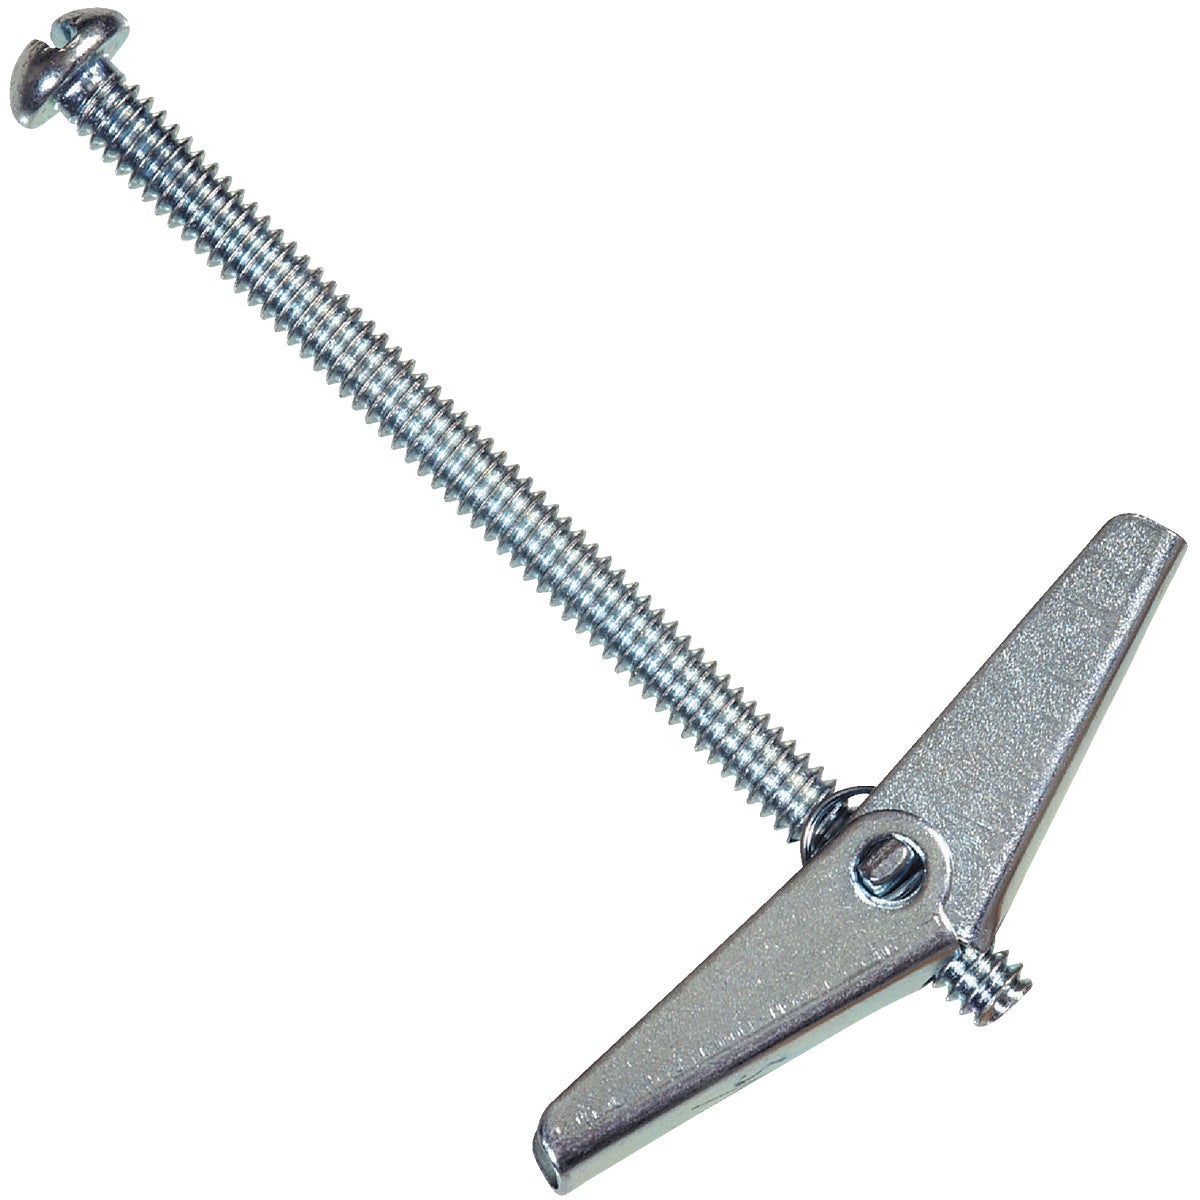 The Anchor Center HILLMAN 41426 Hillman 3/16 In. Round Head 3 In. L Toggle Bolt Hollow Wall Anchor (10 Ct.) 41426